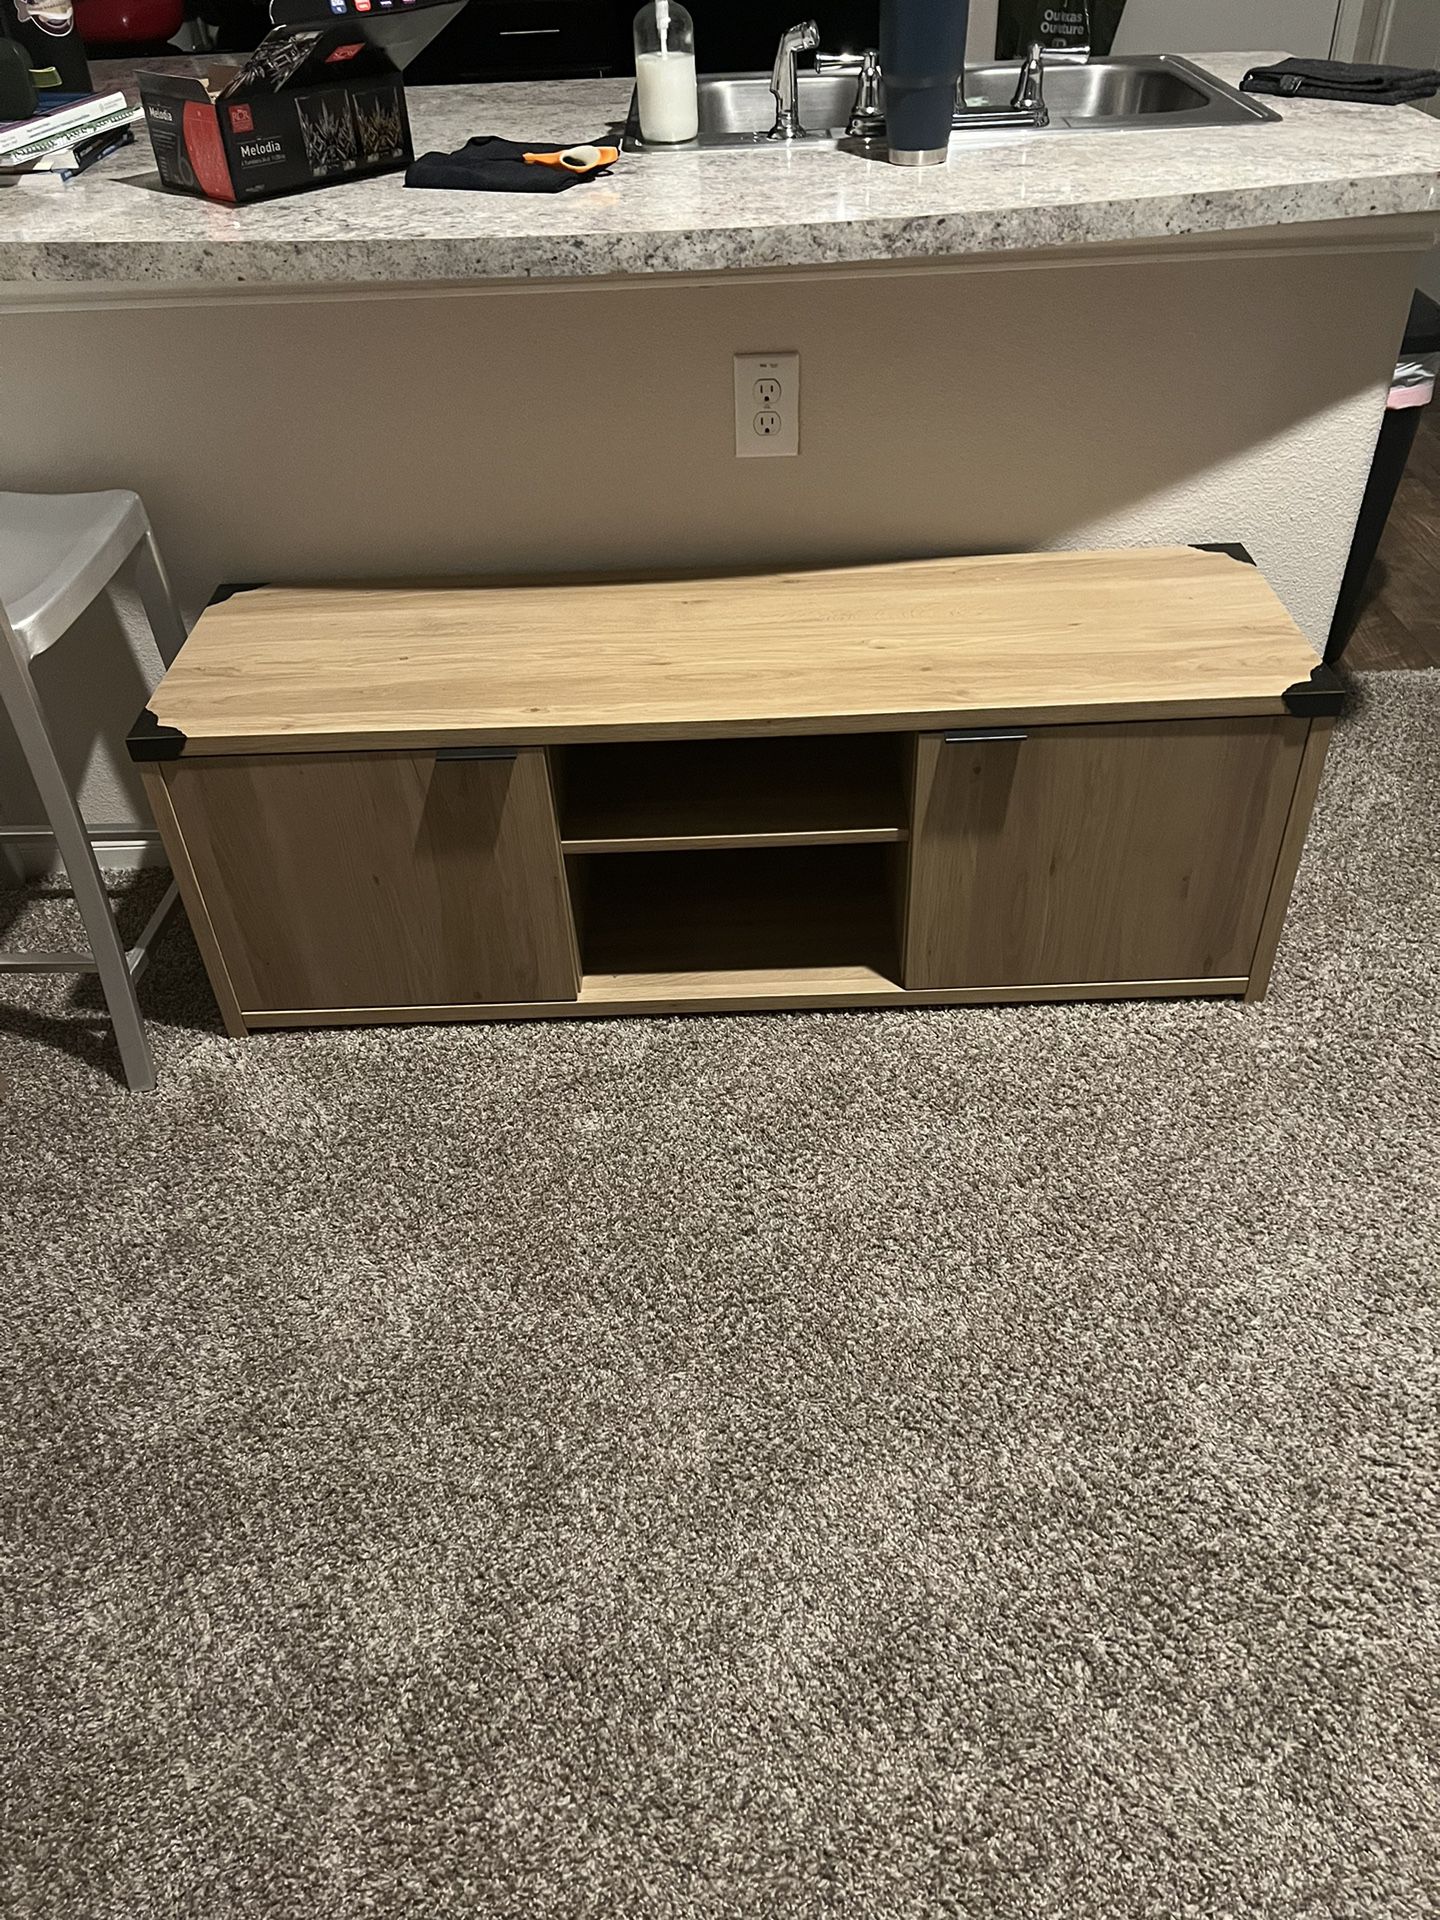 Matching TV Stand and Coffee Table FREE!!!